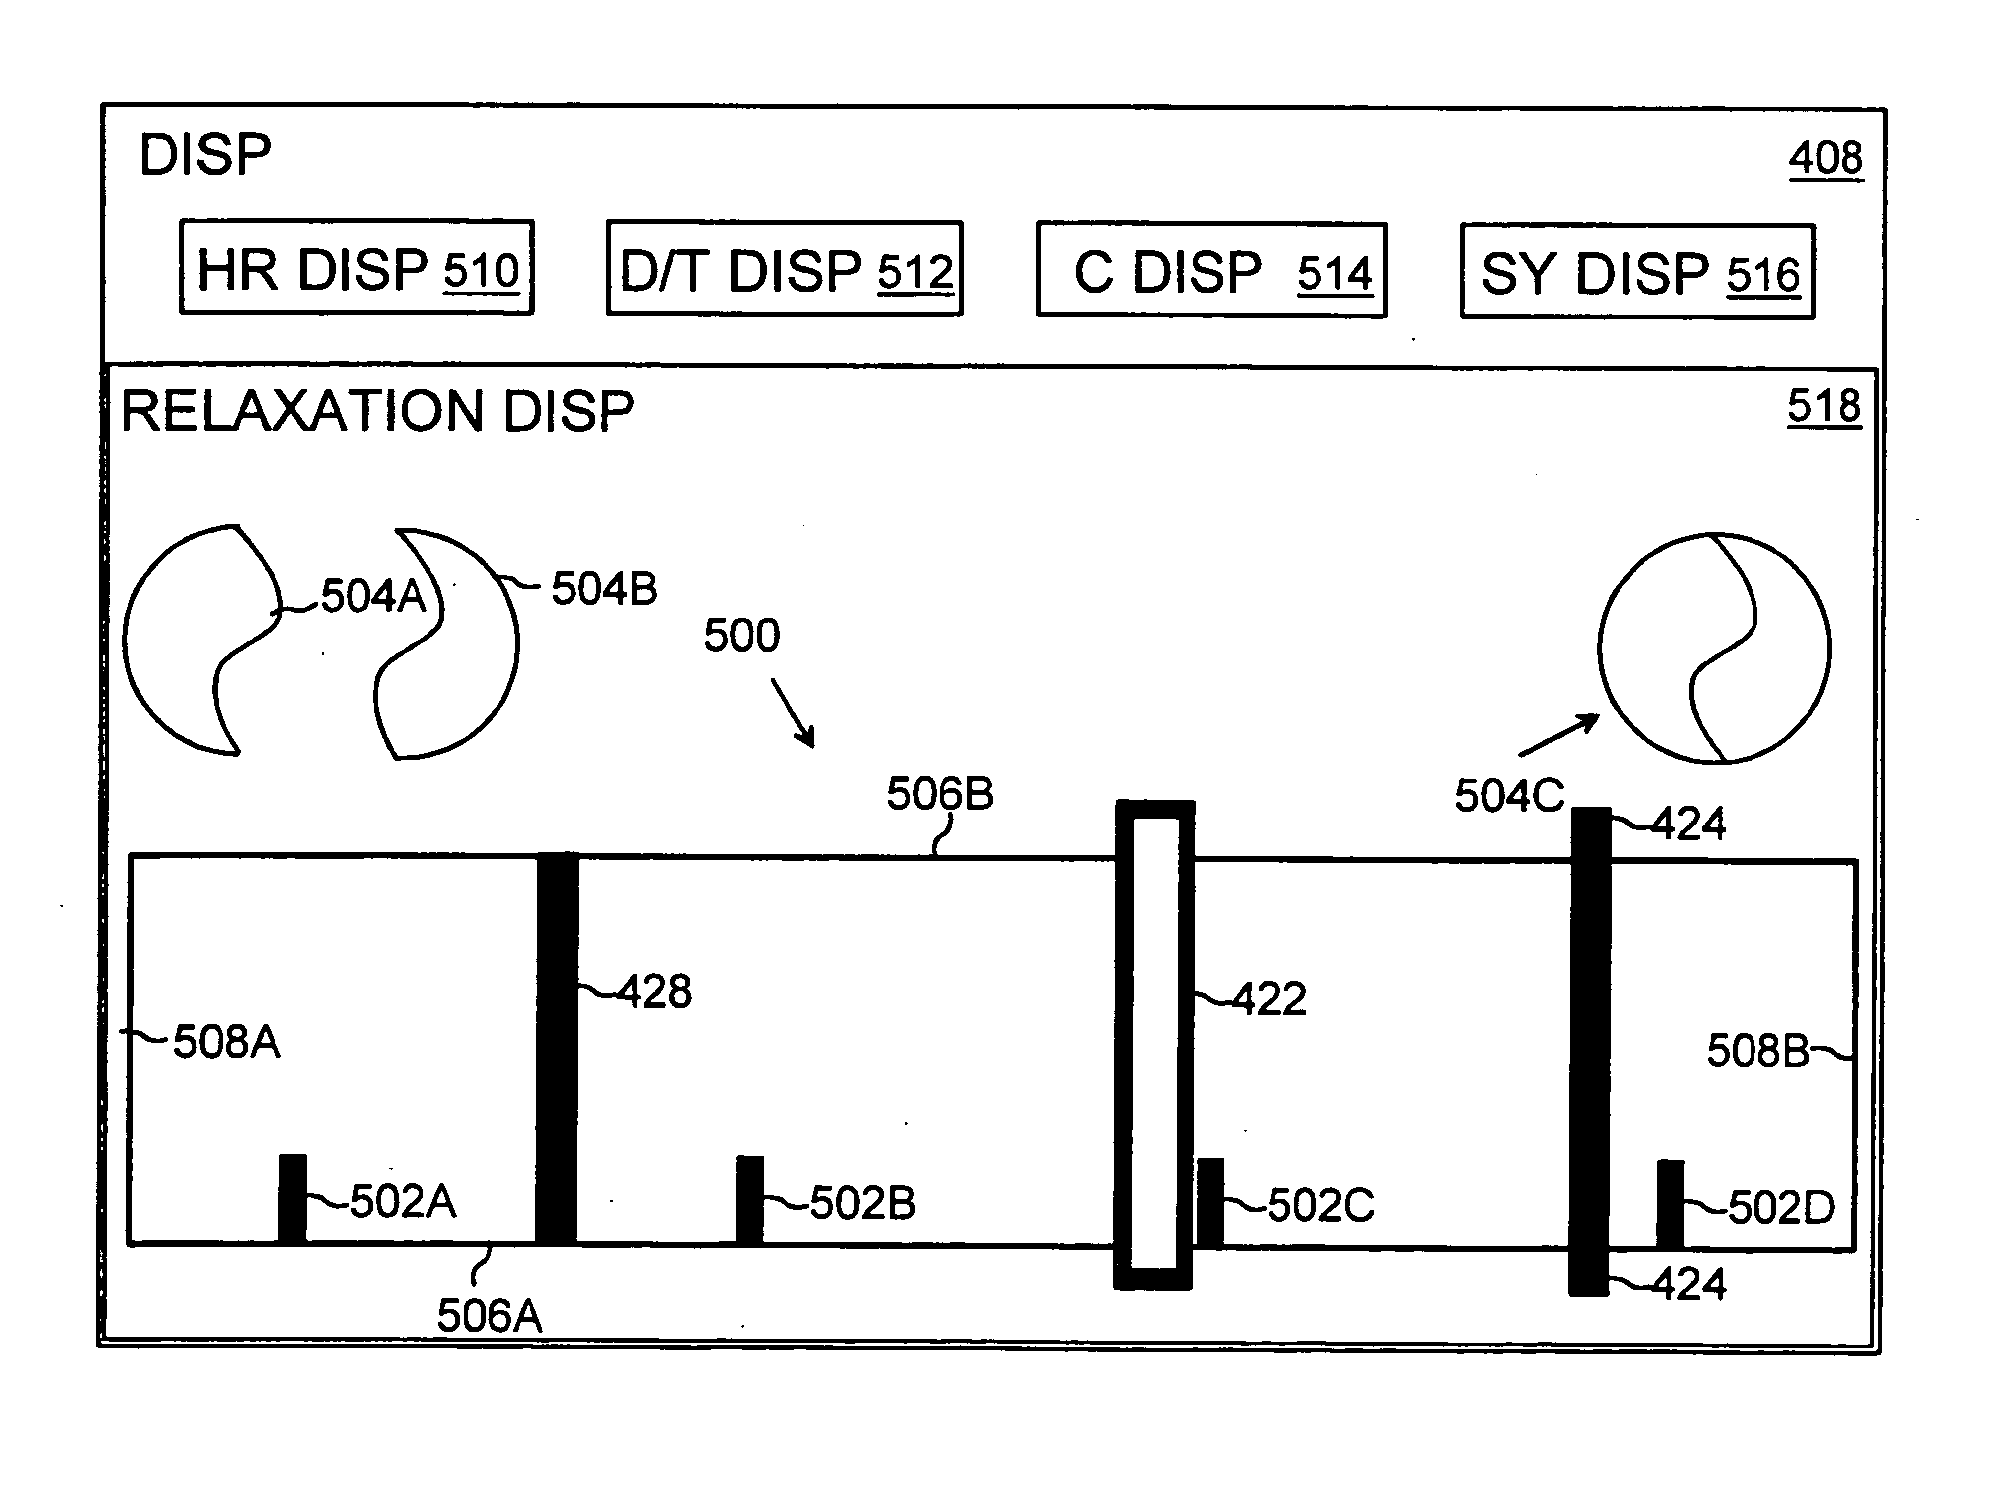 Method of monitoring human relaxation level, and user-operated heart rate monitor